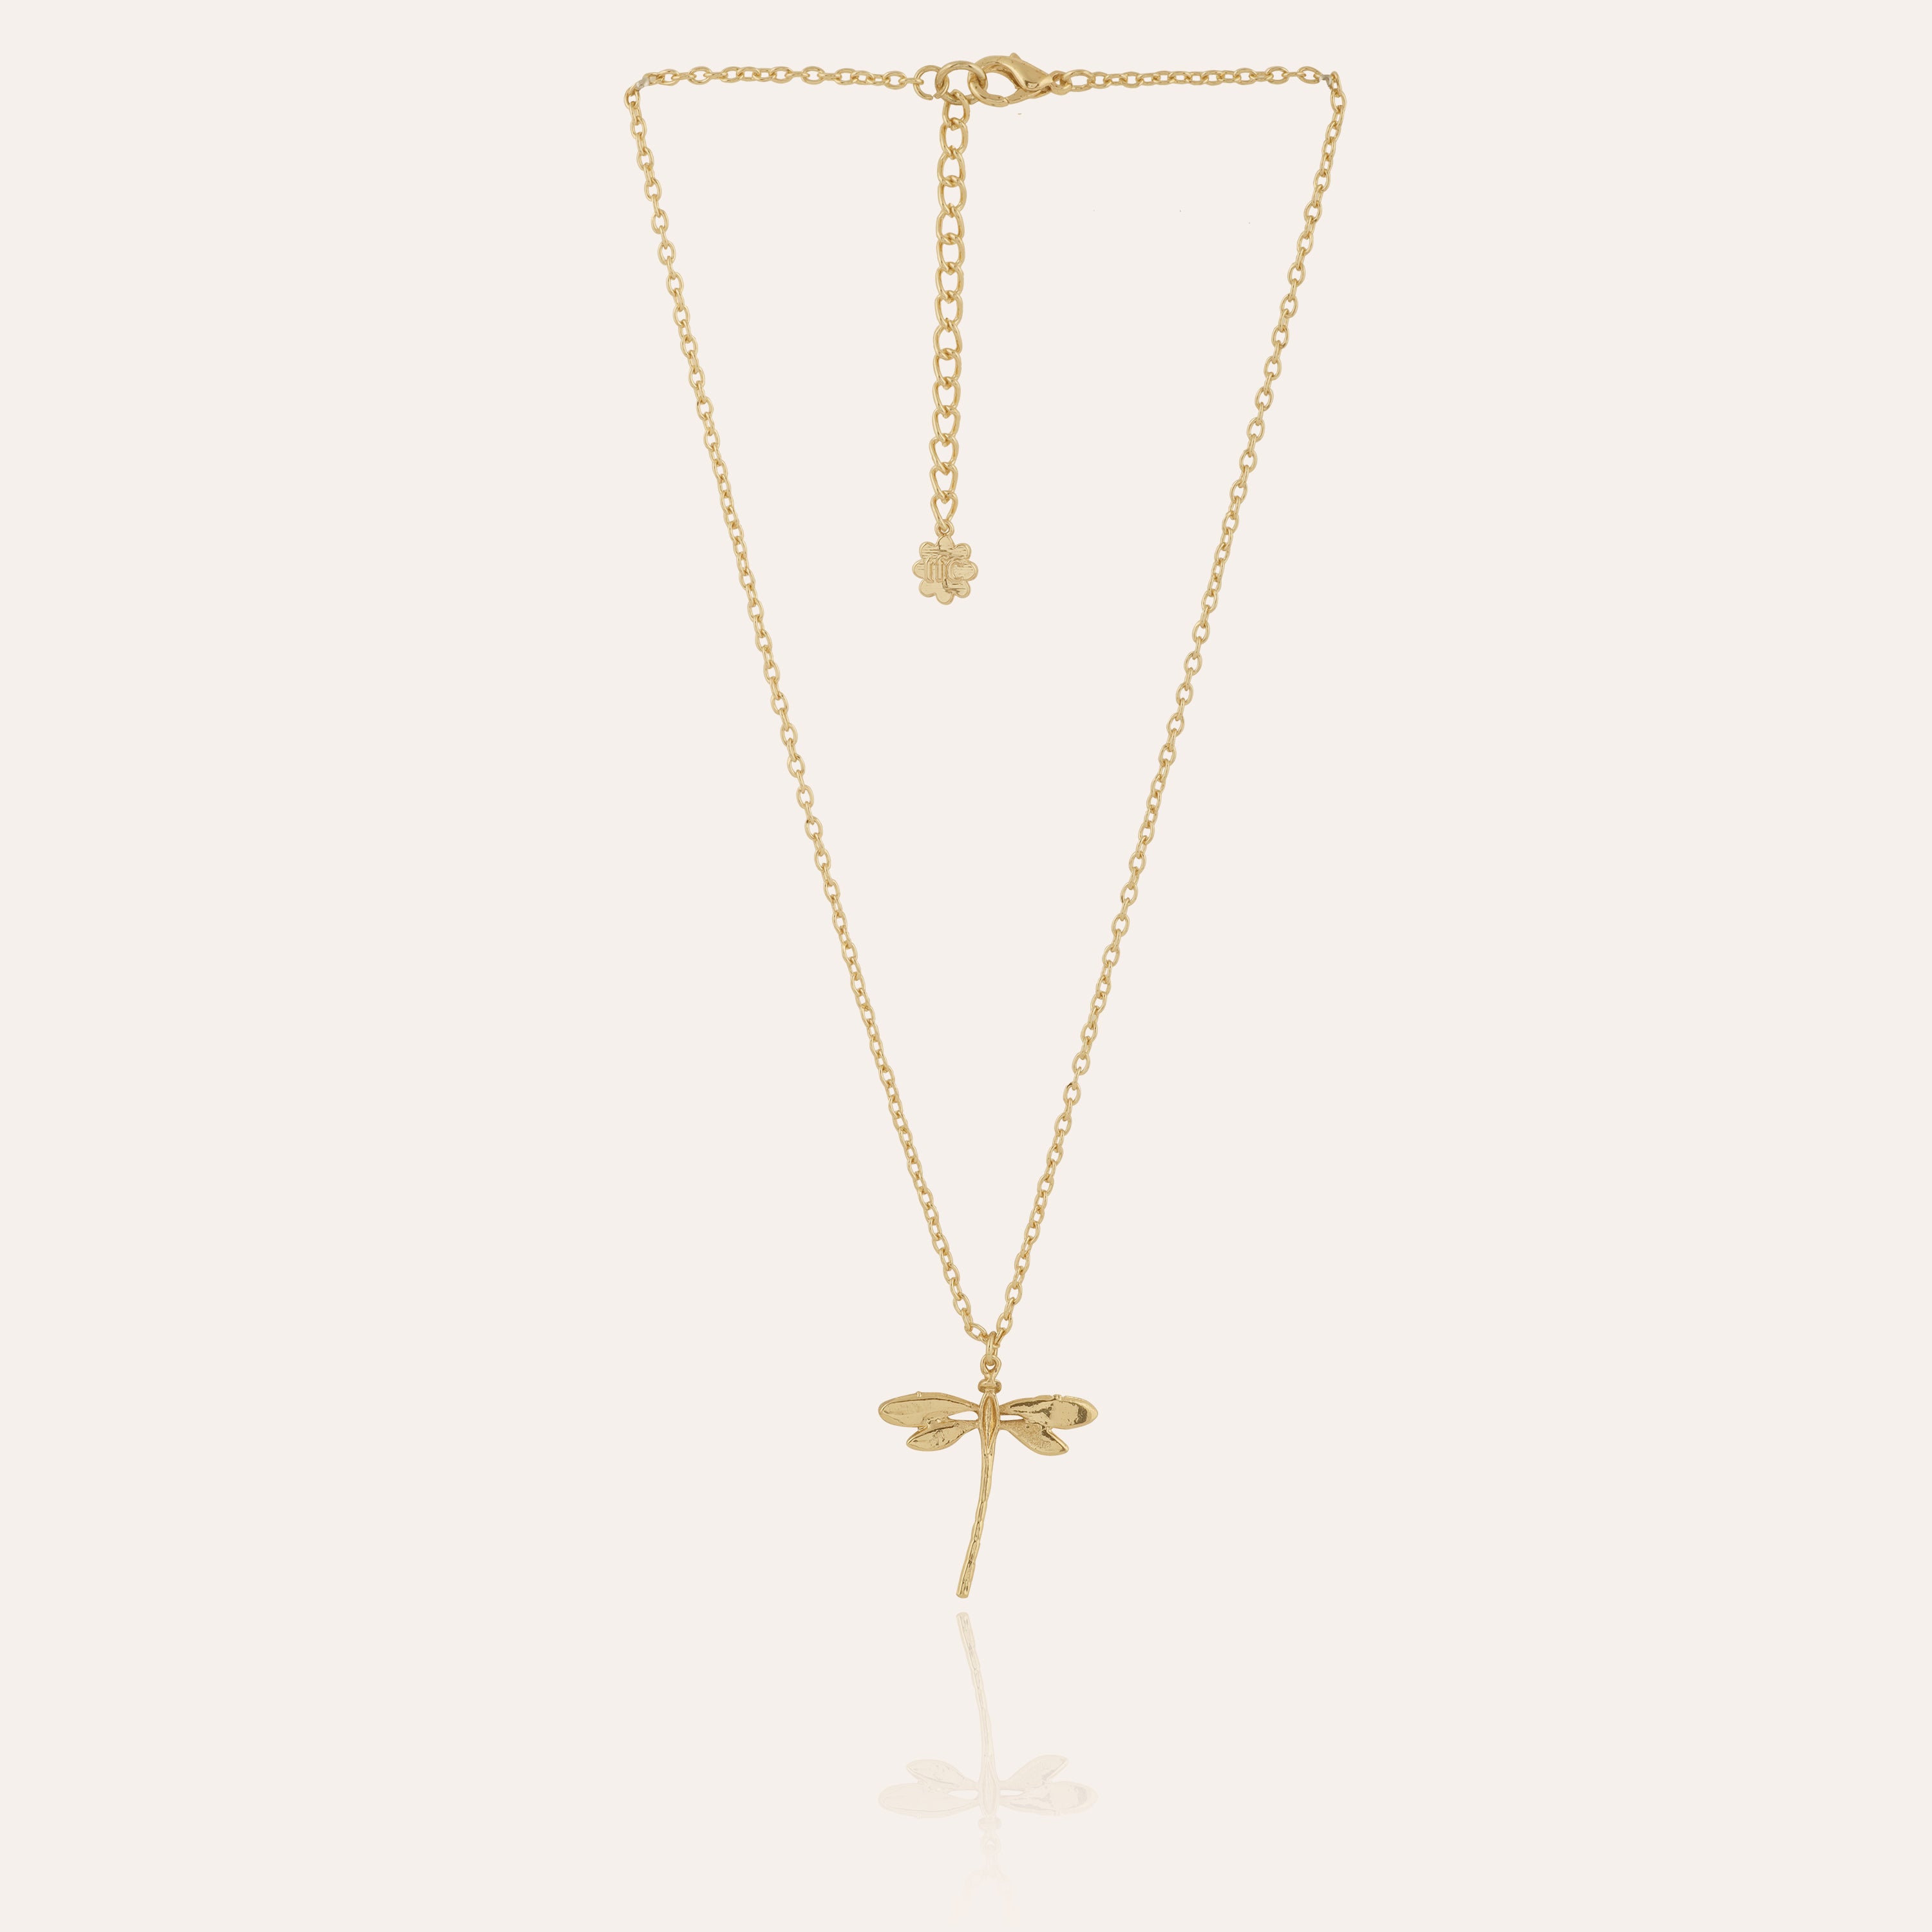 TFC Dragonfly Gold Plated Pendant Necklace-Enhance your elegance with our collection of gold-plated necklaces for women. Choose from stunning pendant necklaces, chic choker necklaces, and trendy layered necklaces. Our sleek and dainty designs are both affordable and anti-tarnish, ensuring lasting beauty. Enjoy the cheapest fashion jewellery, lightweight and stylish- only at The Fun Company.